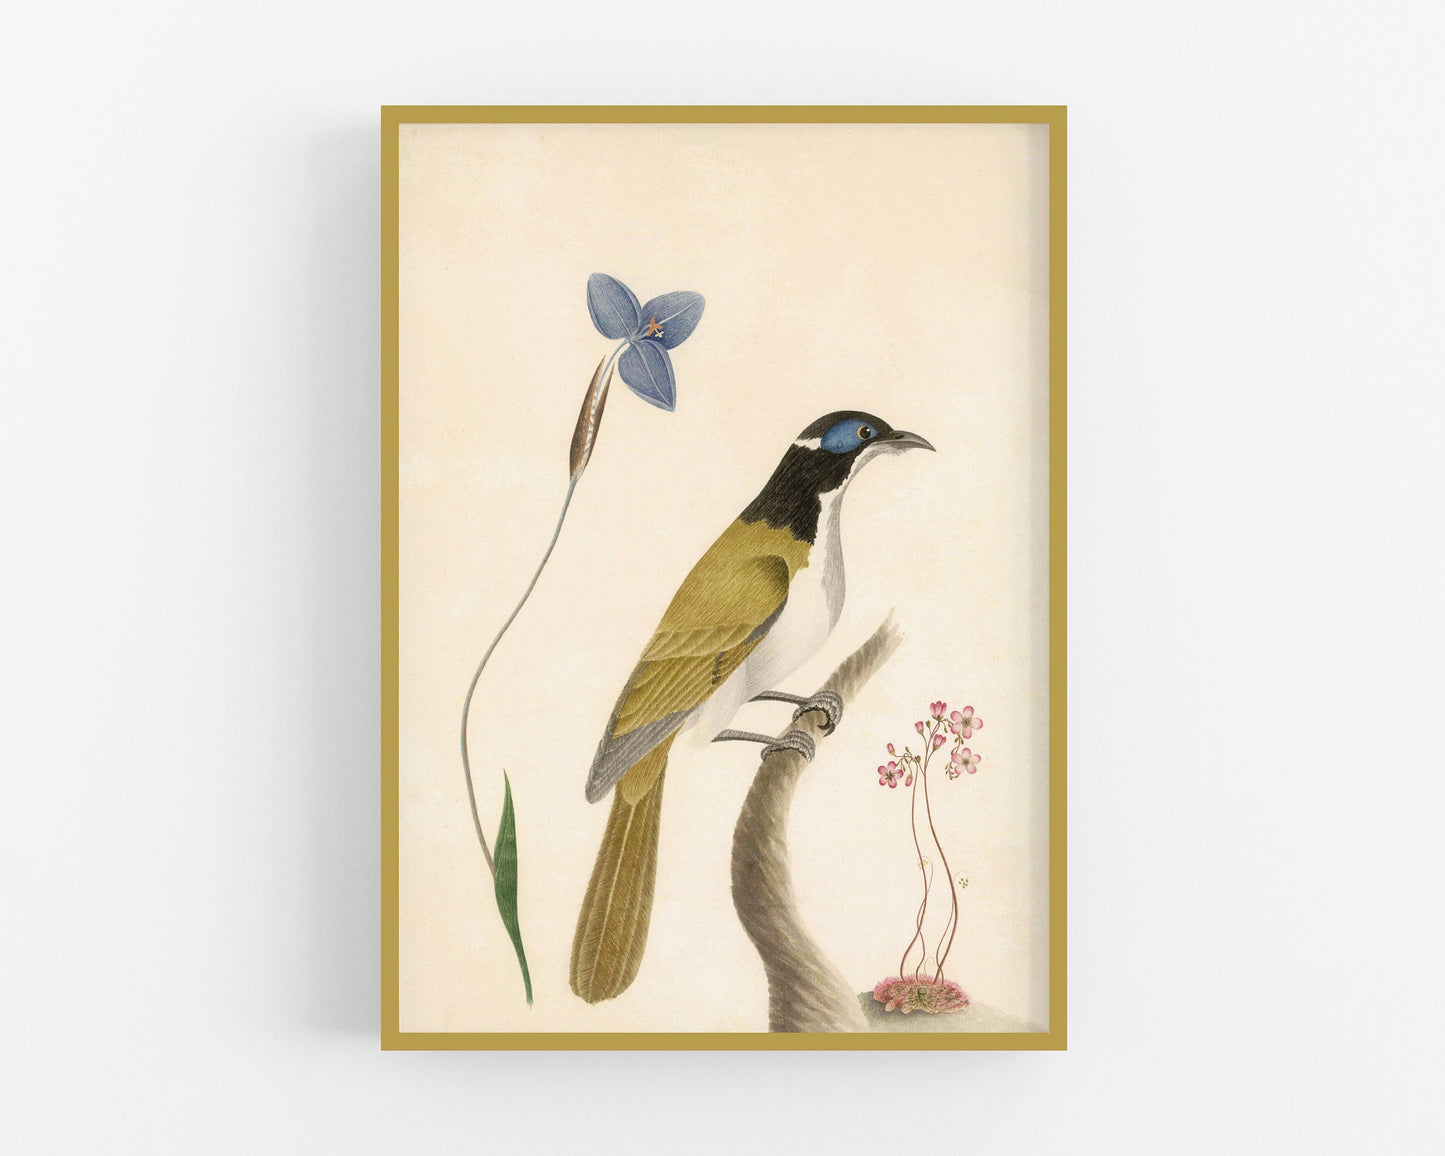 Antique bird and flower art | 18th century bird and plants | Natural history print | Animal décor | Modern vintage | Eco-friendly gift